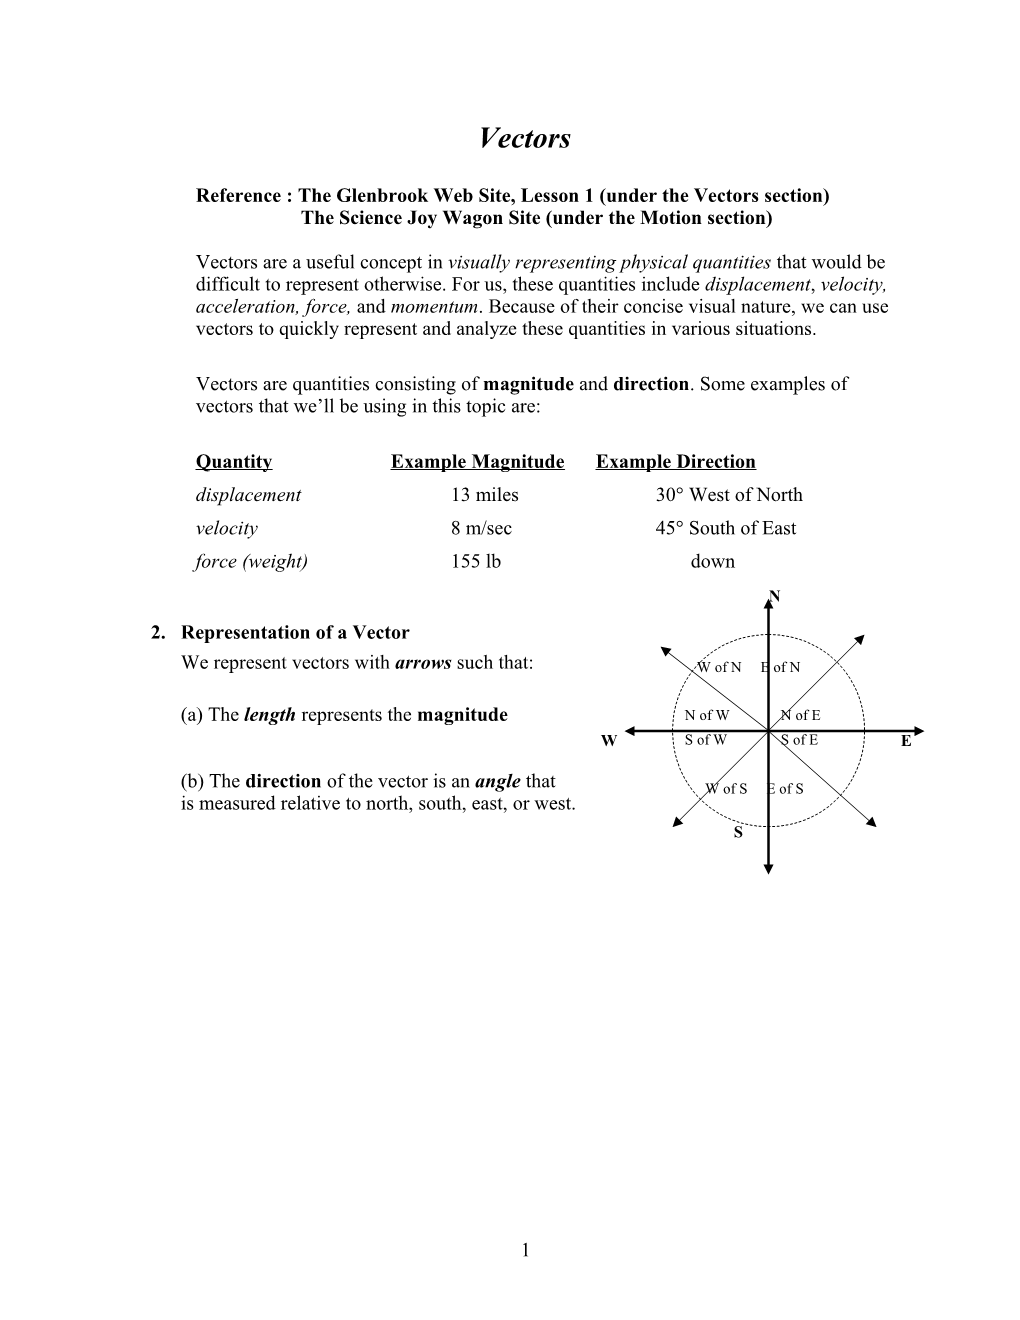 Reference : the Glenbrook Web Site, Lesson 1 (Under the Vectors Section)